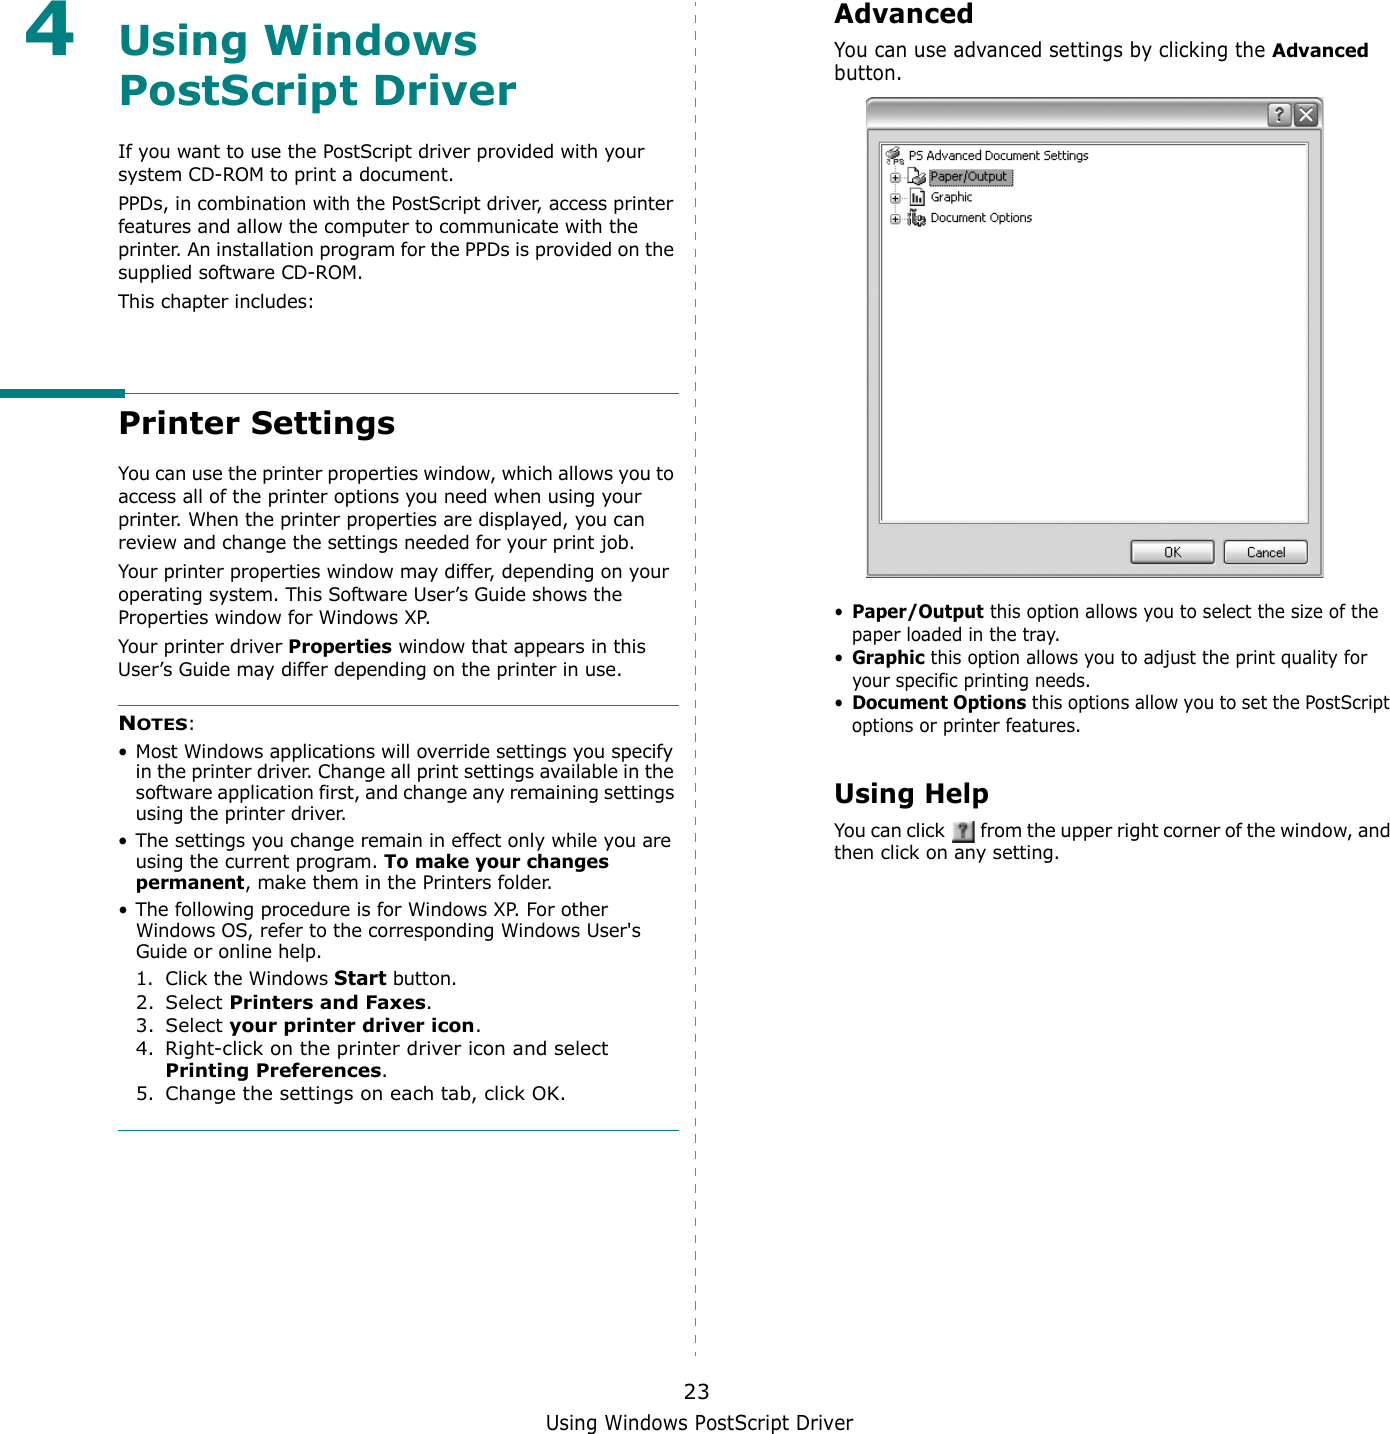 Using Windows PostScript Driver234Using Windows PostScript DriverIf you want to use the PostScript driver provided with your system CD-ROM to print a document.PPDs, in combination with the PostScript driver, access printer features and allow the computer to communicate with the printer. An installation program for the PPDs is provided on the supplied software CD-ROM. This chapter includes:Printer SettingsYou can use the printer properties window, which allows you to access all of the printer options you need when using your printer. When the printer properties are displayed, you can review and change the settings needed for your print job. Your printer properties window may differ, depending on your operating system. This Software User’s Guide shows the Properties window for Windows XP.Your printer driver Properties window that appears in this User’s Guide may differ depending on the printer in use.NOTES:• Most Windows applications will override settings you specify in the printer driver. Change all print settings available in the software application first, and change any remaining settings using the printer driver. • The settings you change remain in effect only while you are using the current program. To make your changes permanent, make them in the Printers folder. • The following procedure is for Windows XP. For other Windows OS, refer to the corresponding Windows User&apos;s Guide or online help.1. Click the Windows Start button.2. Select Printers and Faxes.3. Select your printer driver icon.4. Right-click on the printer driver icon and select Printing Preferences.5. Change the settings on each tab, click OK.AdvancedYou can use advanced settings by clicking the Advanced button. •Paper/Output this option allows you to select the size of the paper loaded in the tray.•Graphic this option allows you to adjust the print quality for your specific printing needs.•Document Options this options allow you to set the PostScript options or printer features.Using HelpYou can click   from the upper right corner of the window, and then click on any setting. 